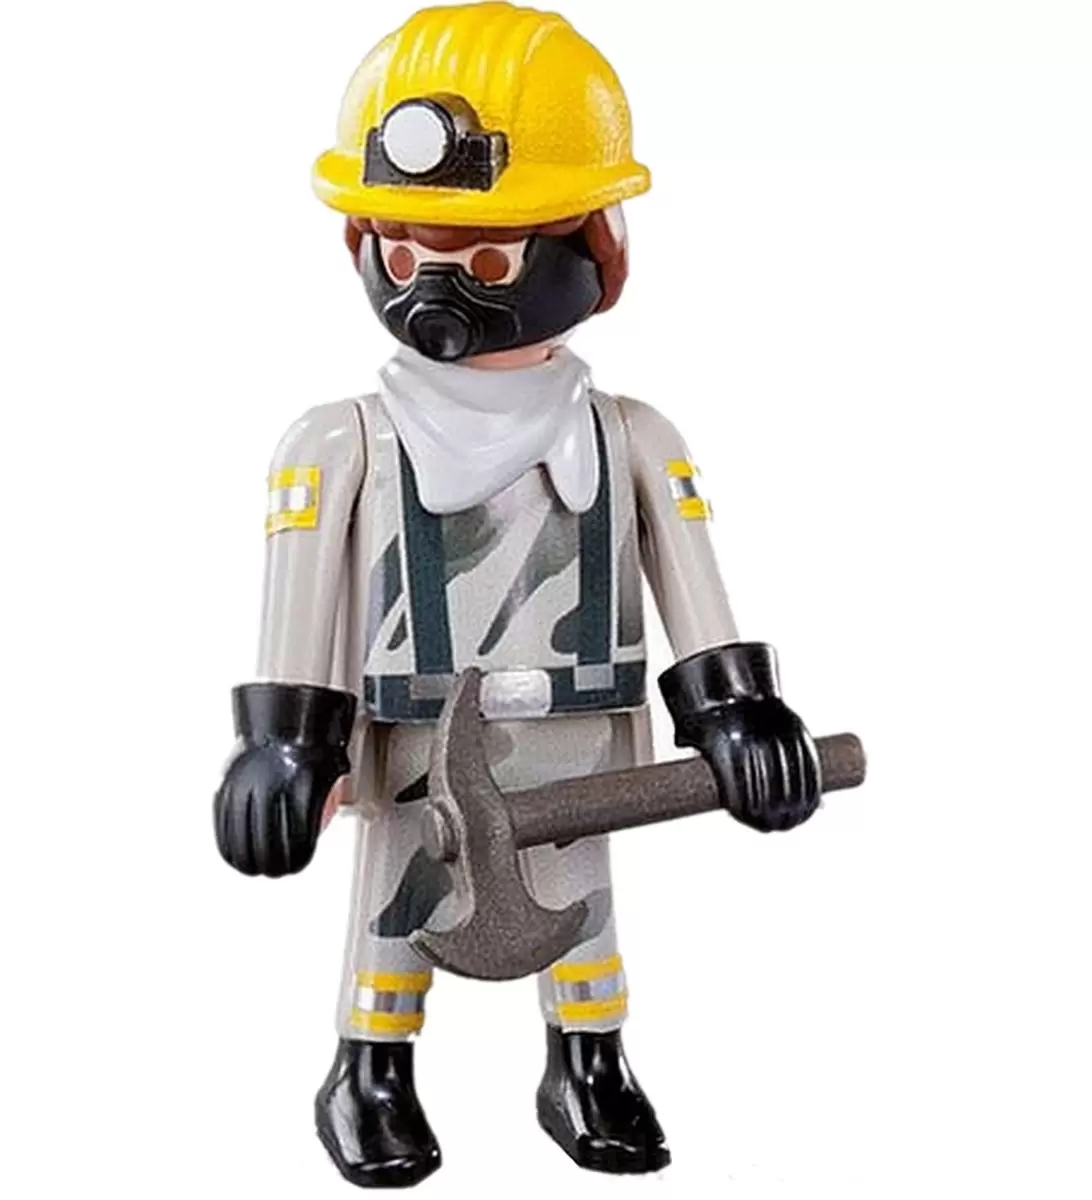 Playmobil Figures Series 12 - The miner